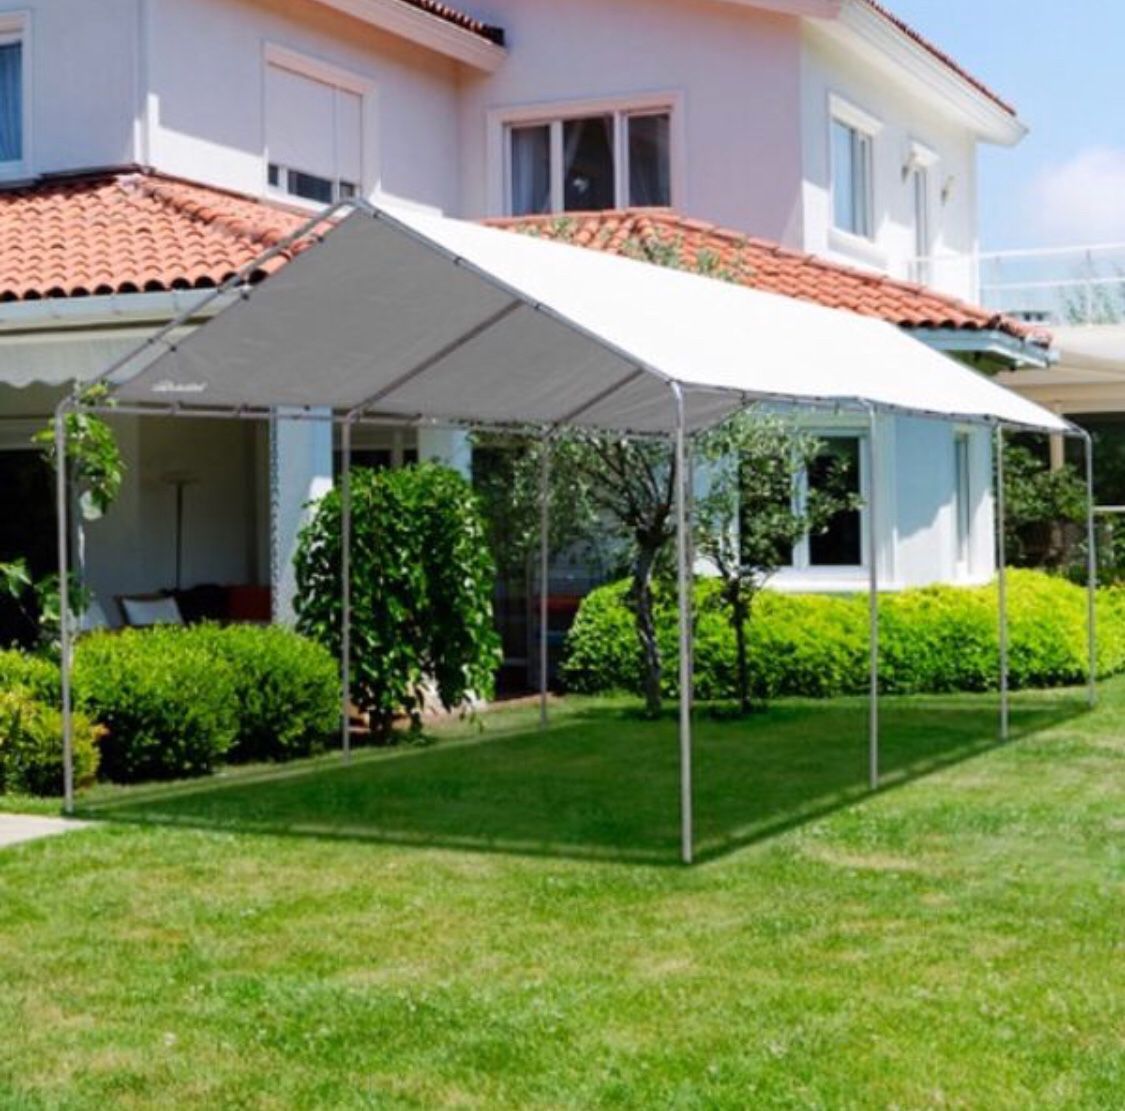 NEW canopy carport tent 10x10 for $85 (available different sizes)